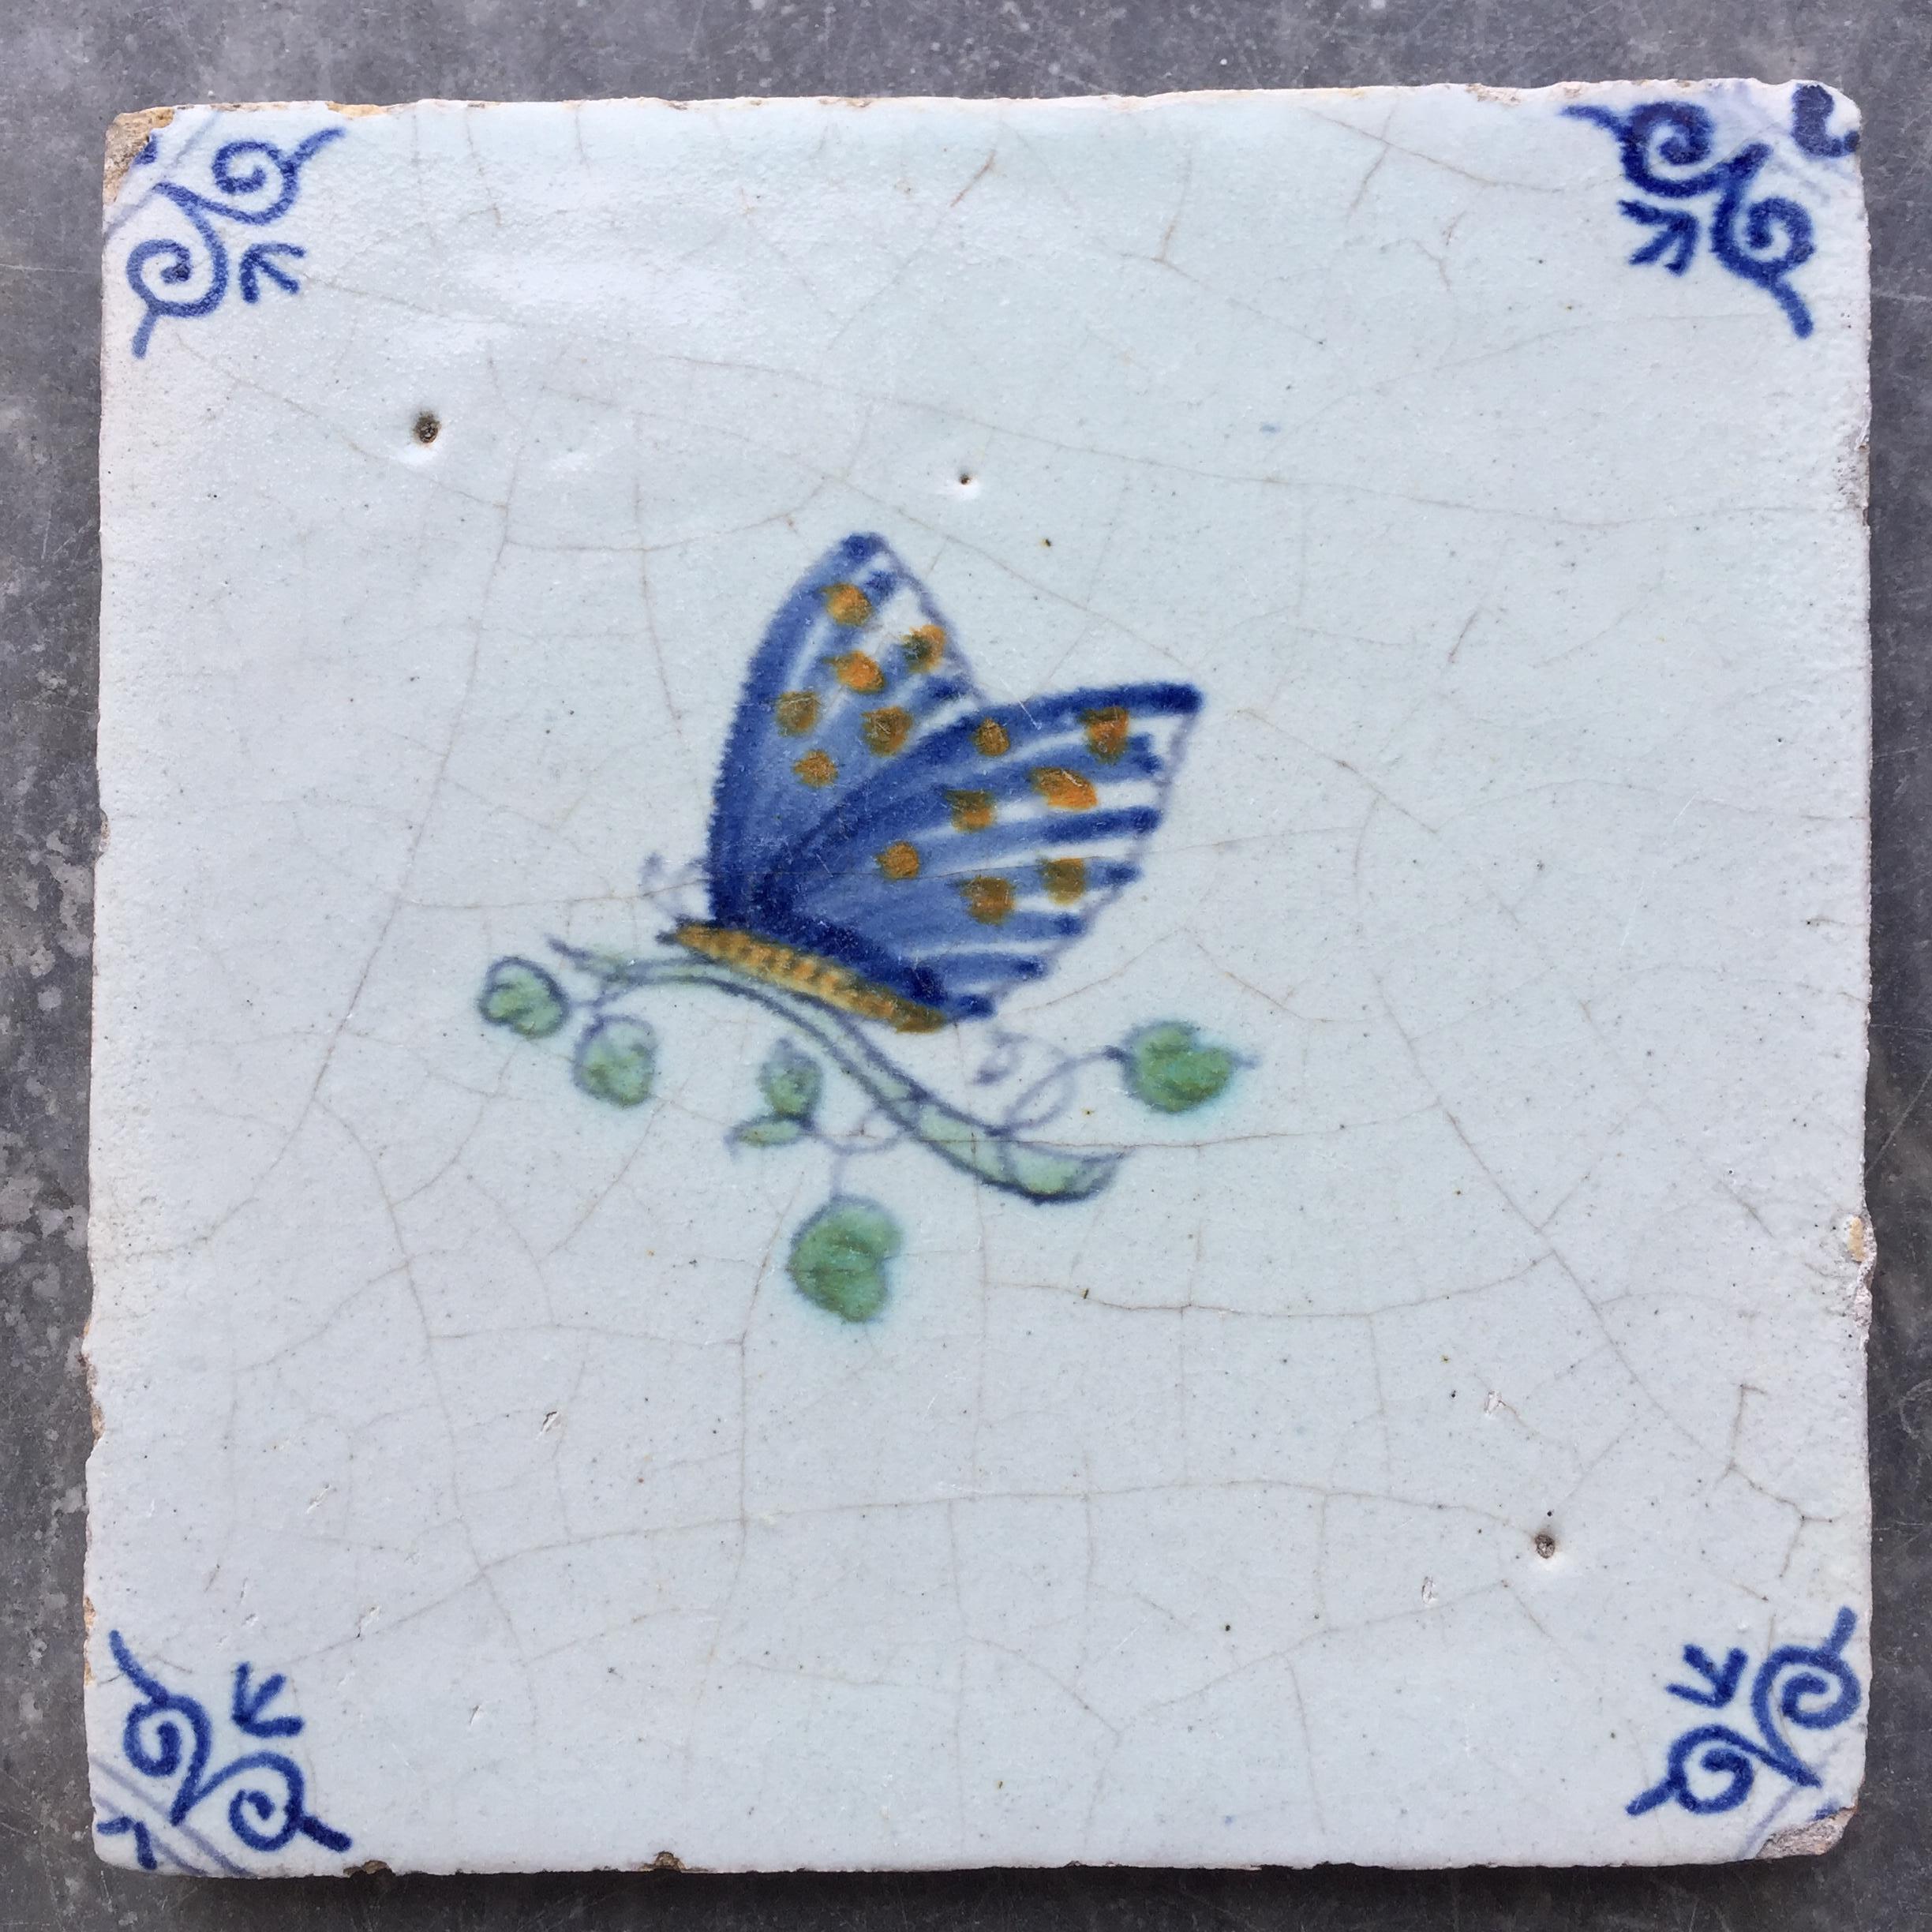 The Netherlands
Circa 1630 - 1660

A fine and beautiful tile with a decoration of a large butterfly on a little branch with leaves.
With oxheads as corner decoration.

A genuine collectible of approximately 400 years old.